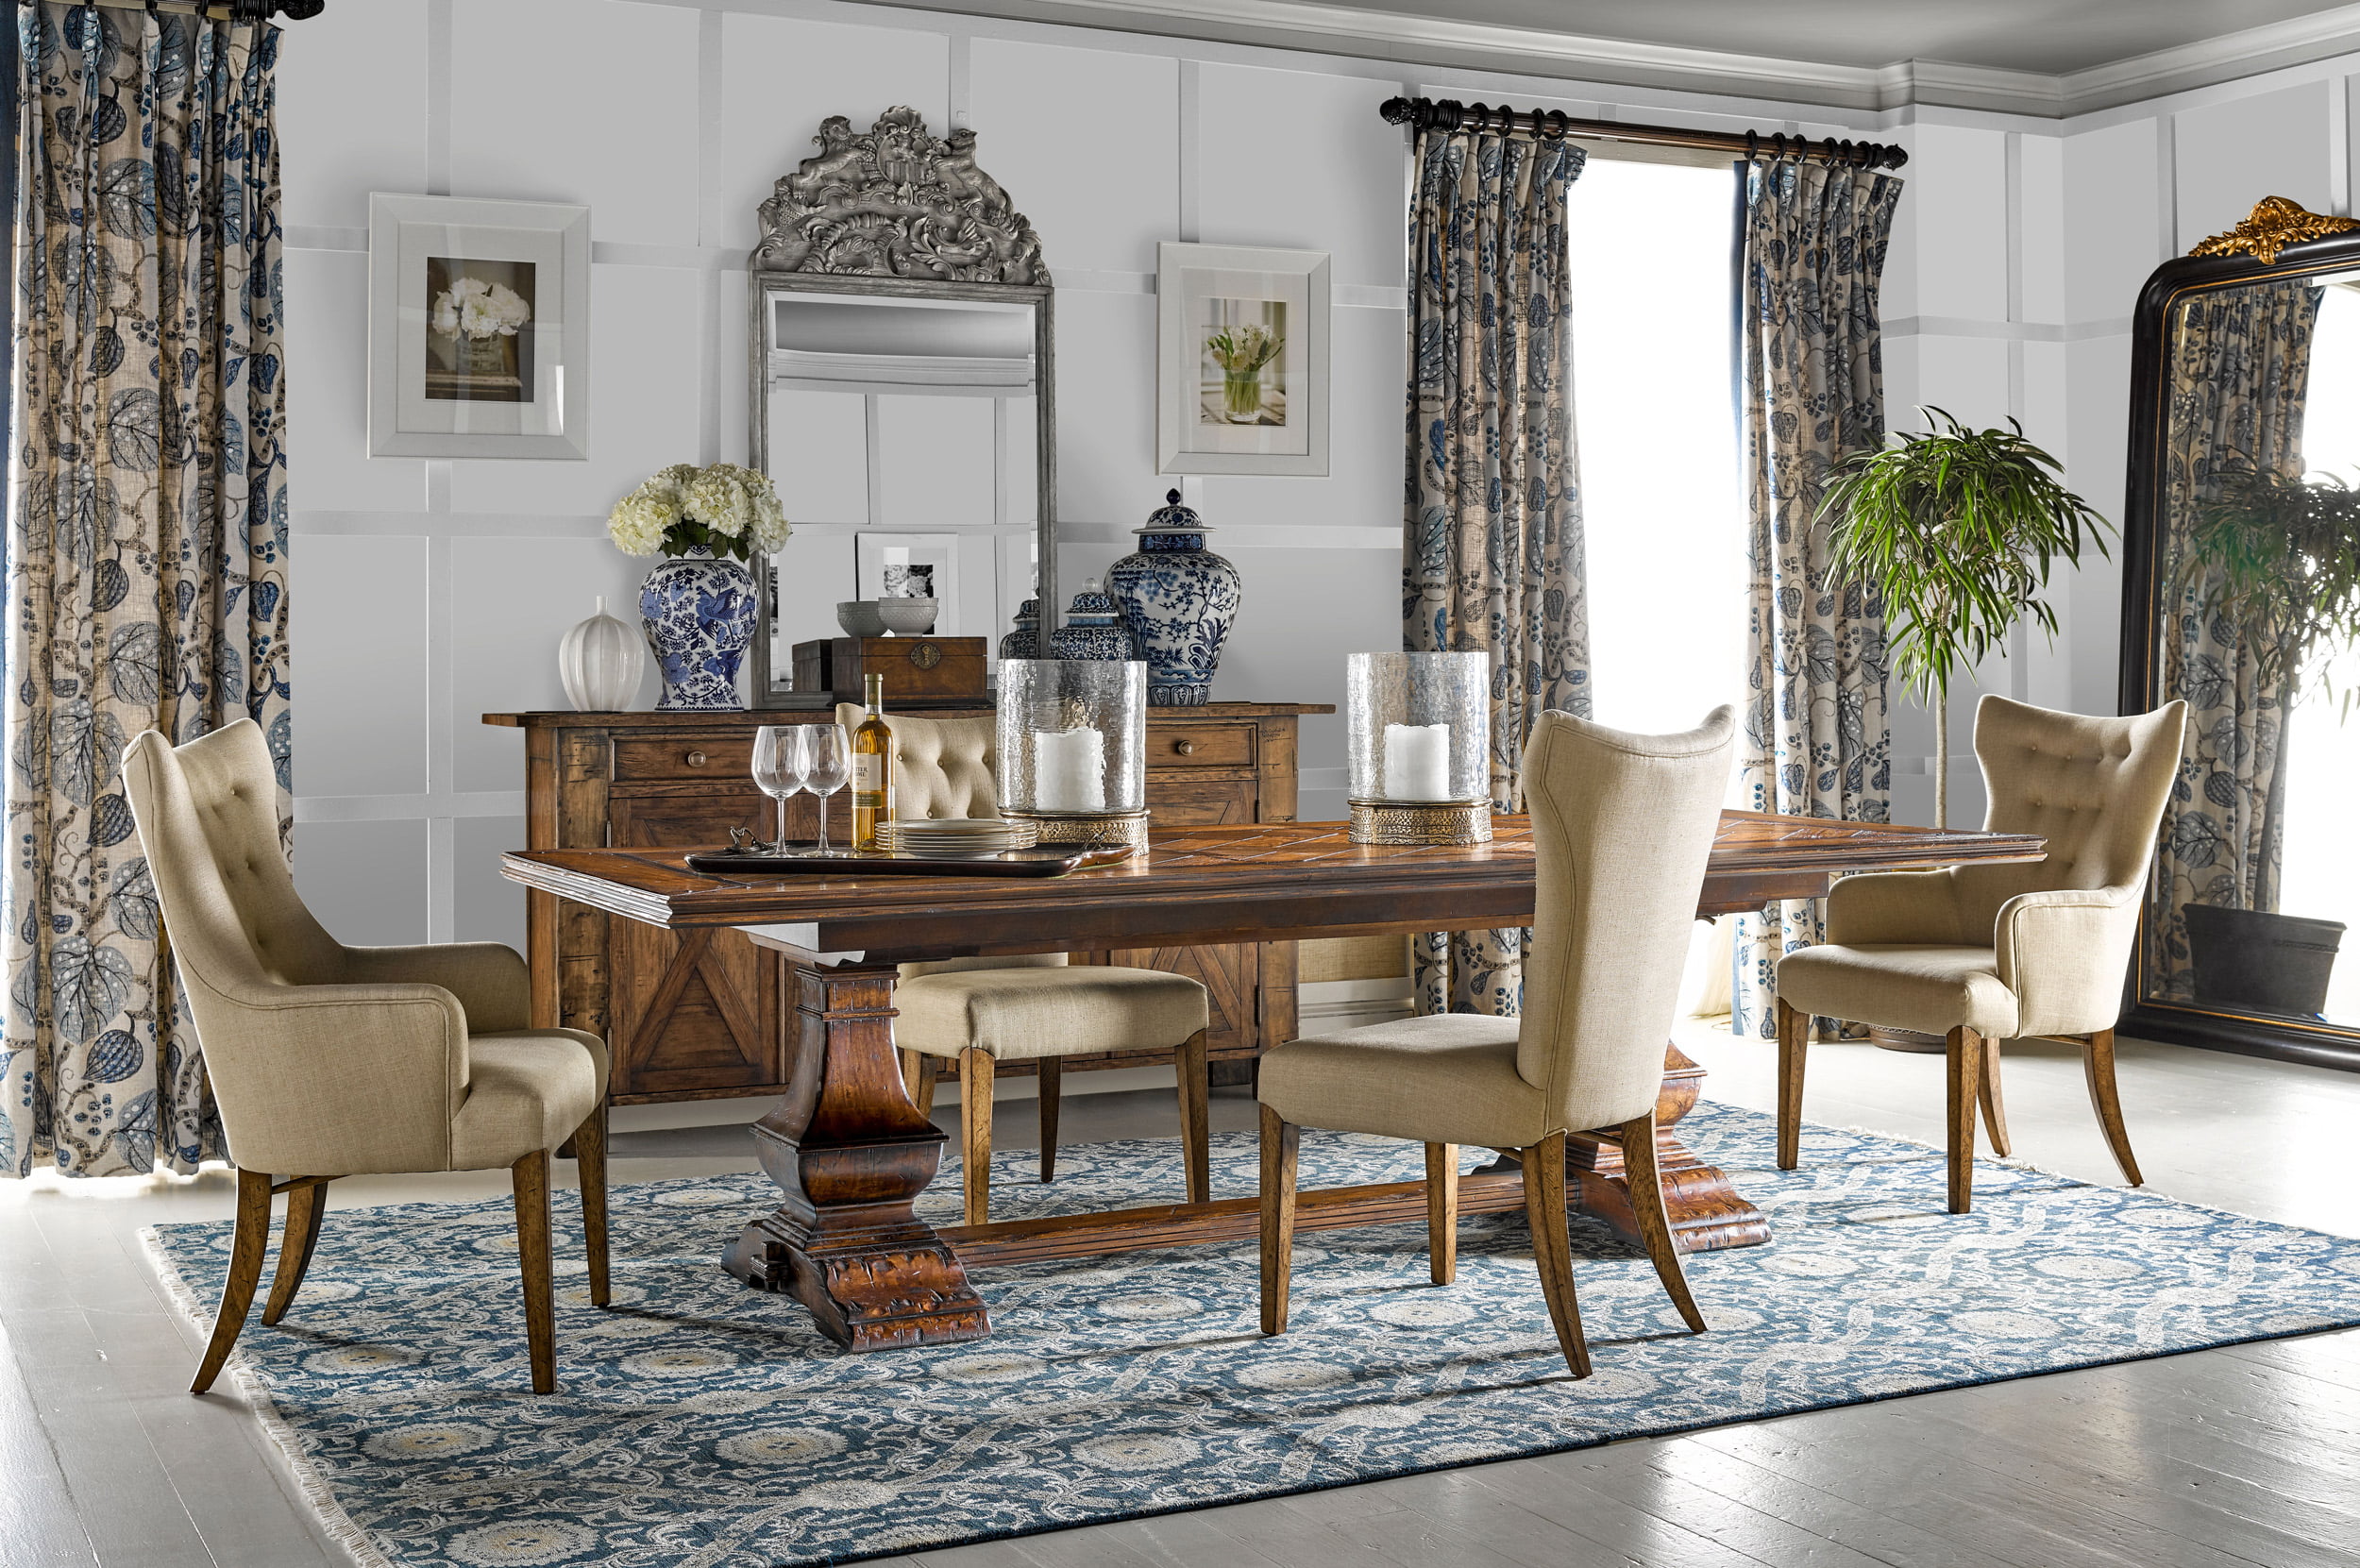 Dining room decor with ivory, blue and wood accents